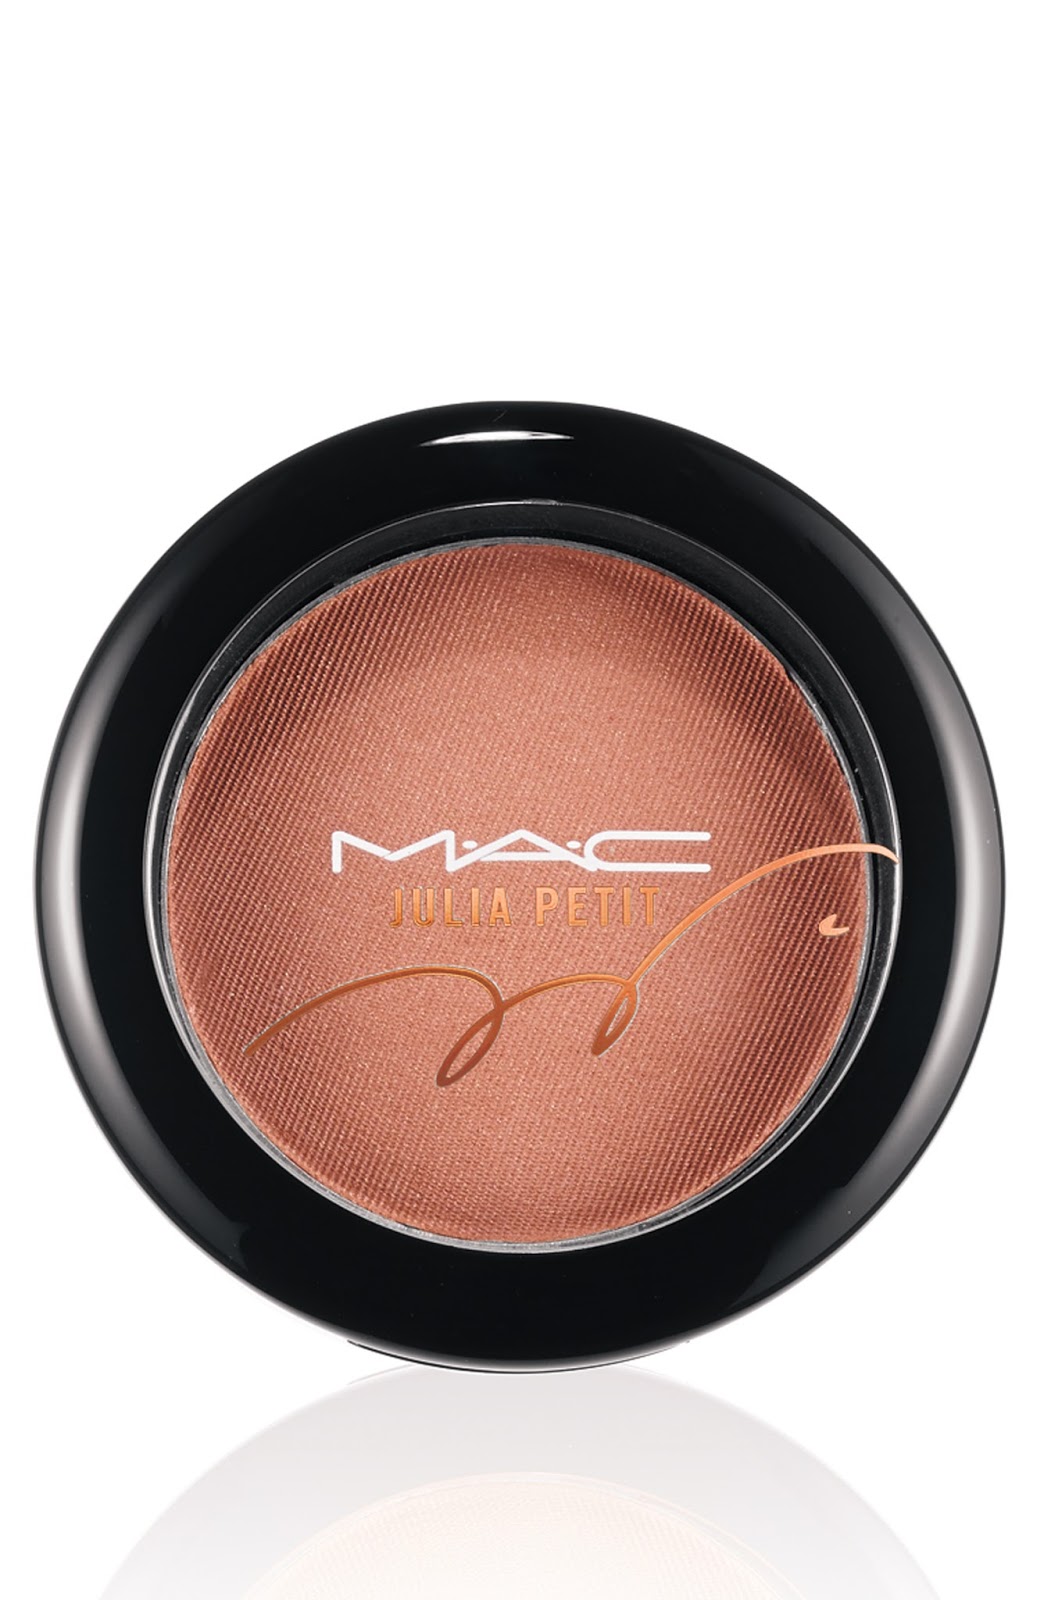 MAC Julia Petit Collection - March 19th, 2015 NZ launch